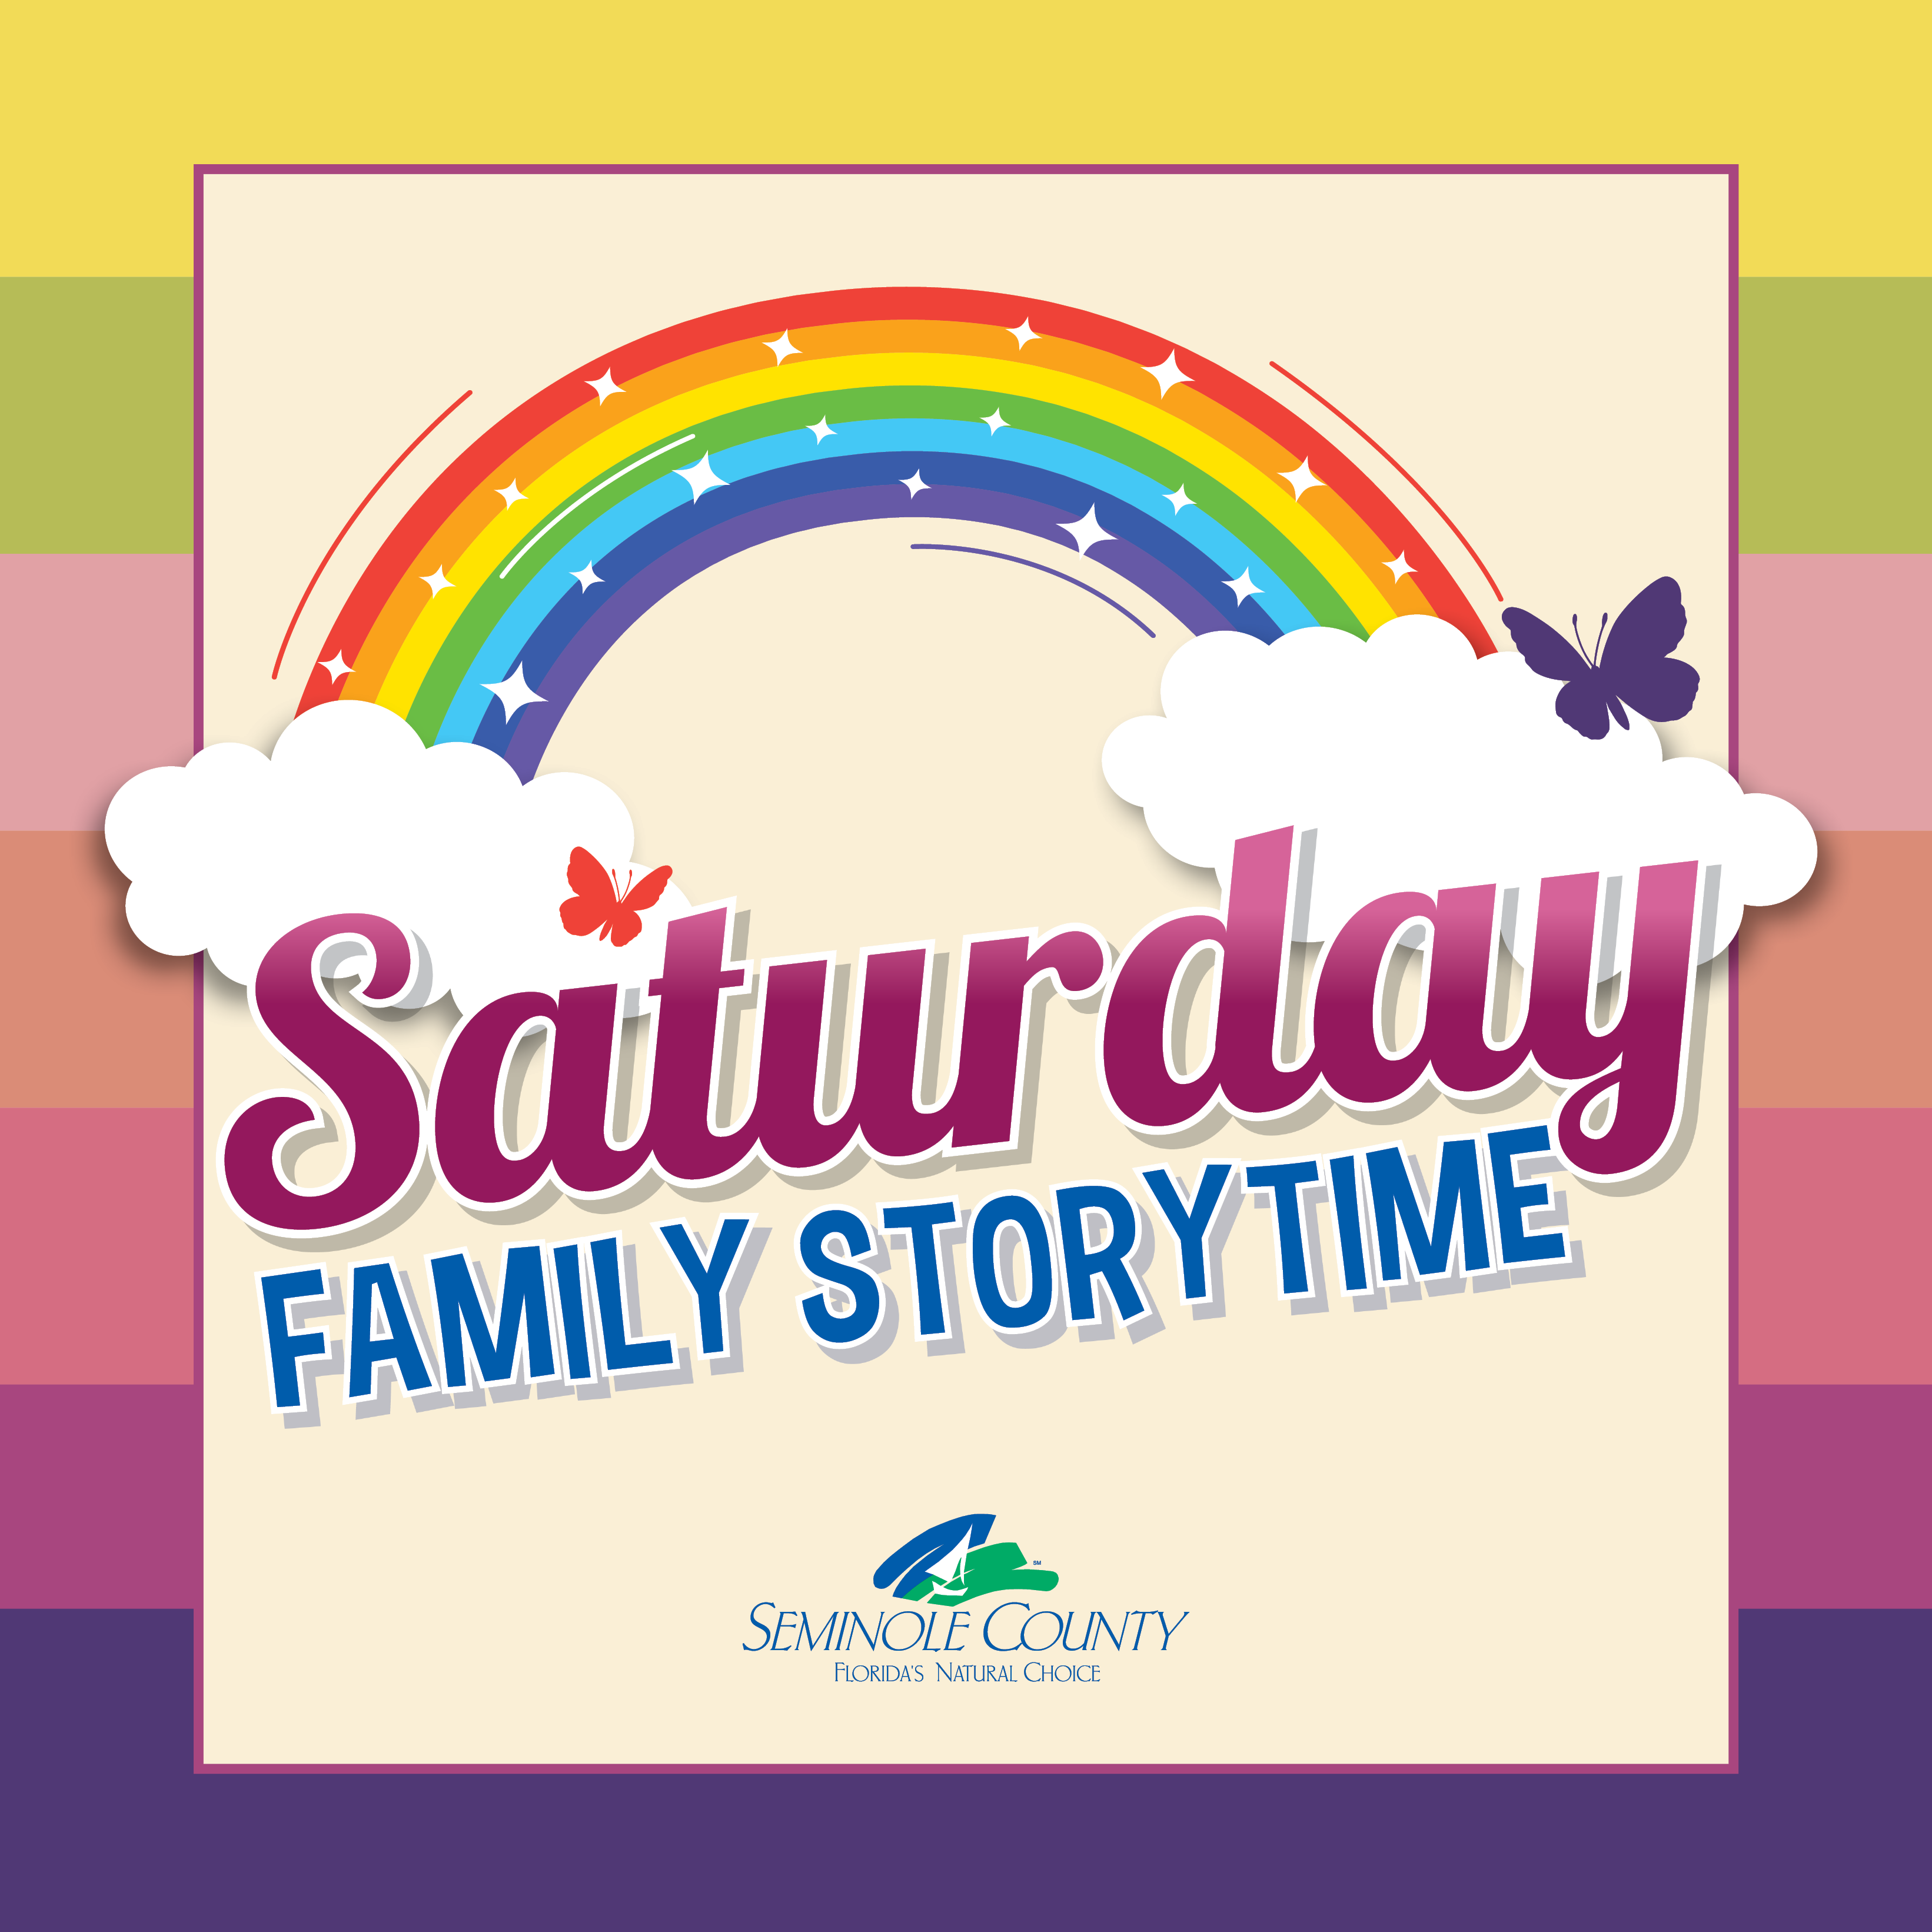 Saturday Family Storytime for kids ages 0-5 years @ Central Branch